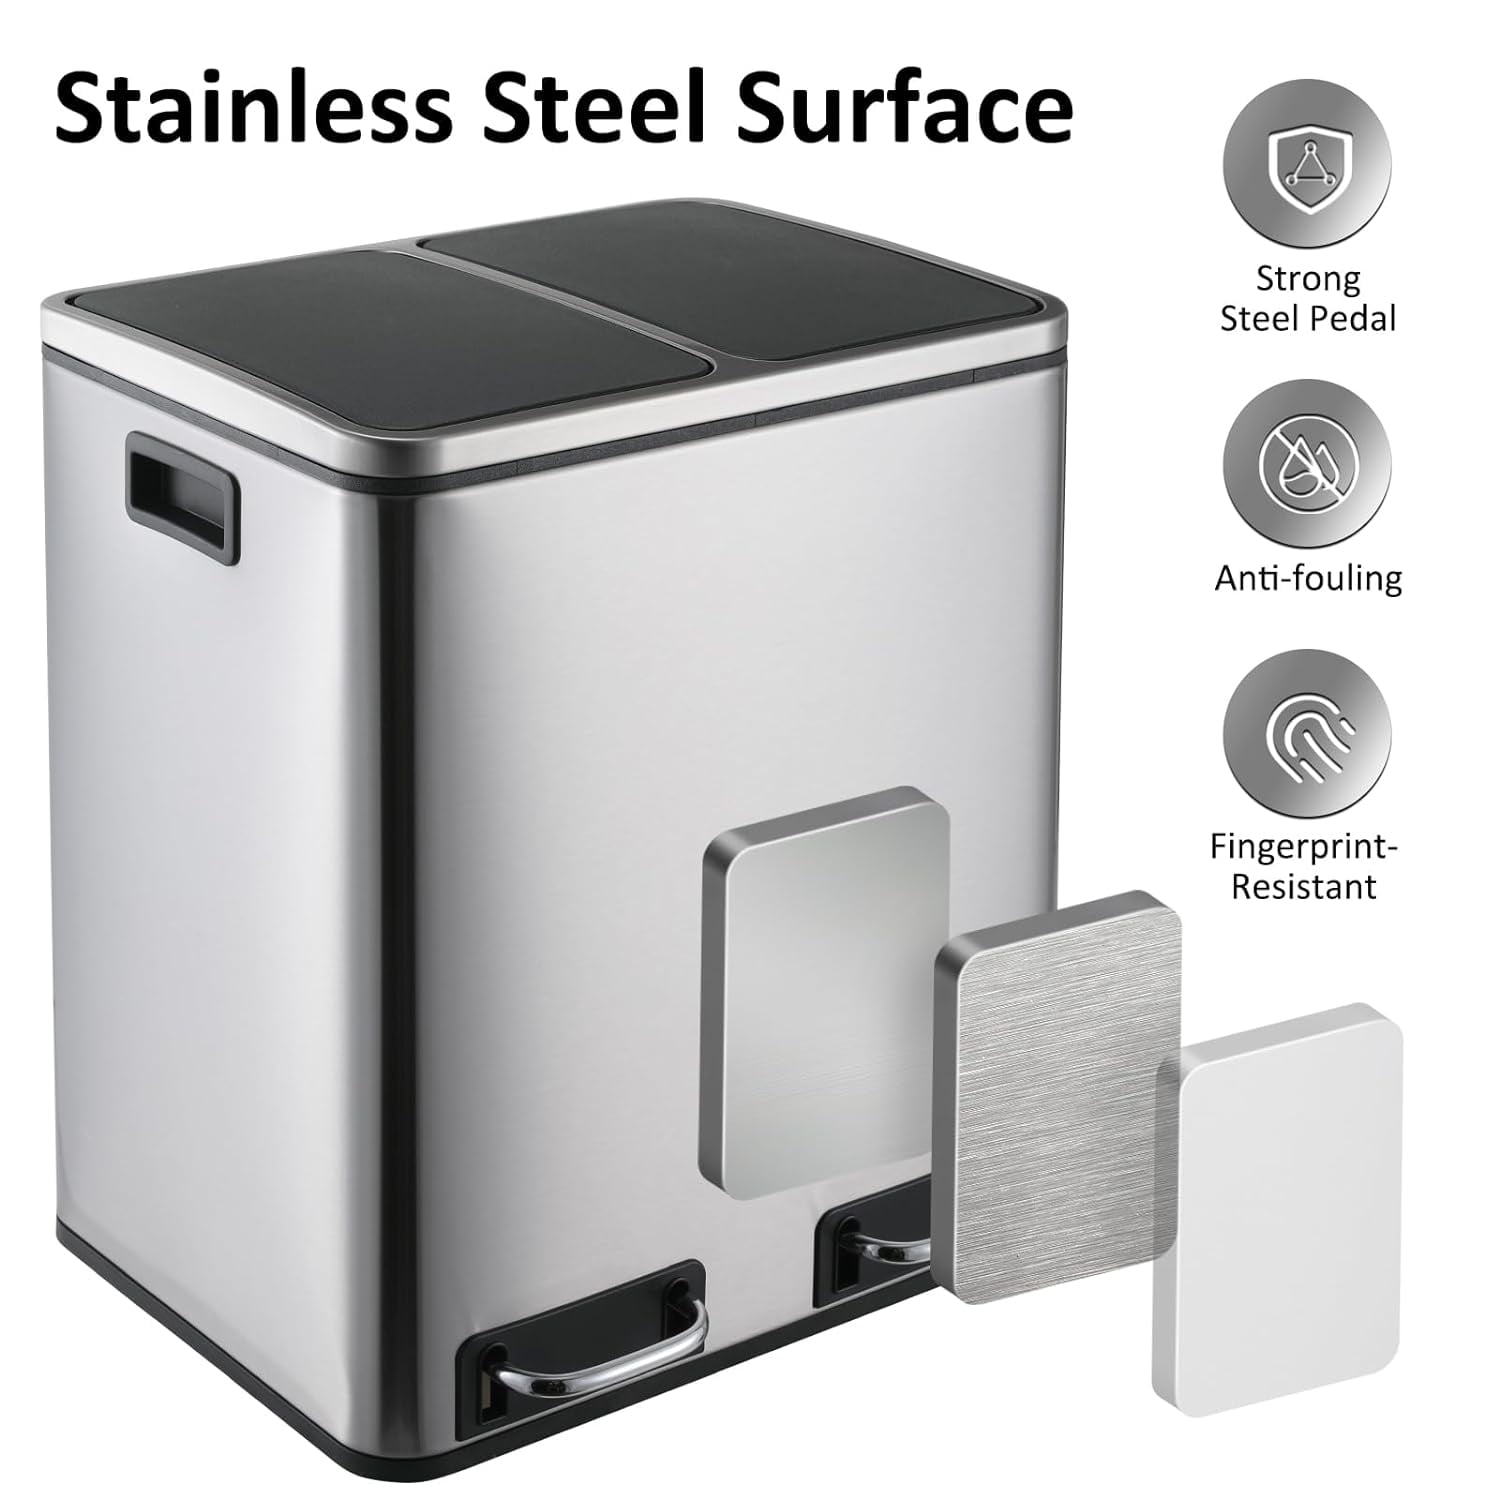 LAZY BUDDY 8 Gallon Stainless Steel Trash Can, Dual Compartment Step on ...